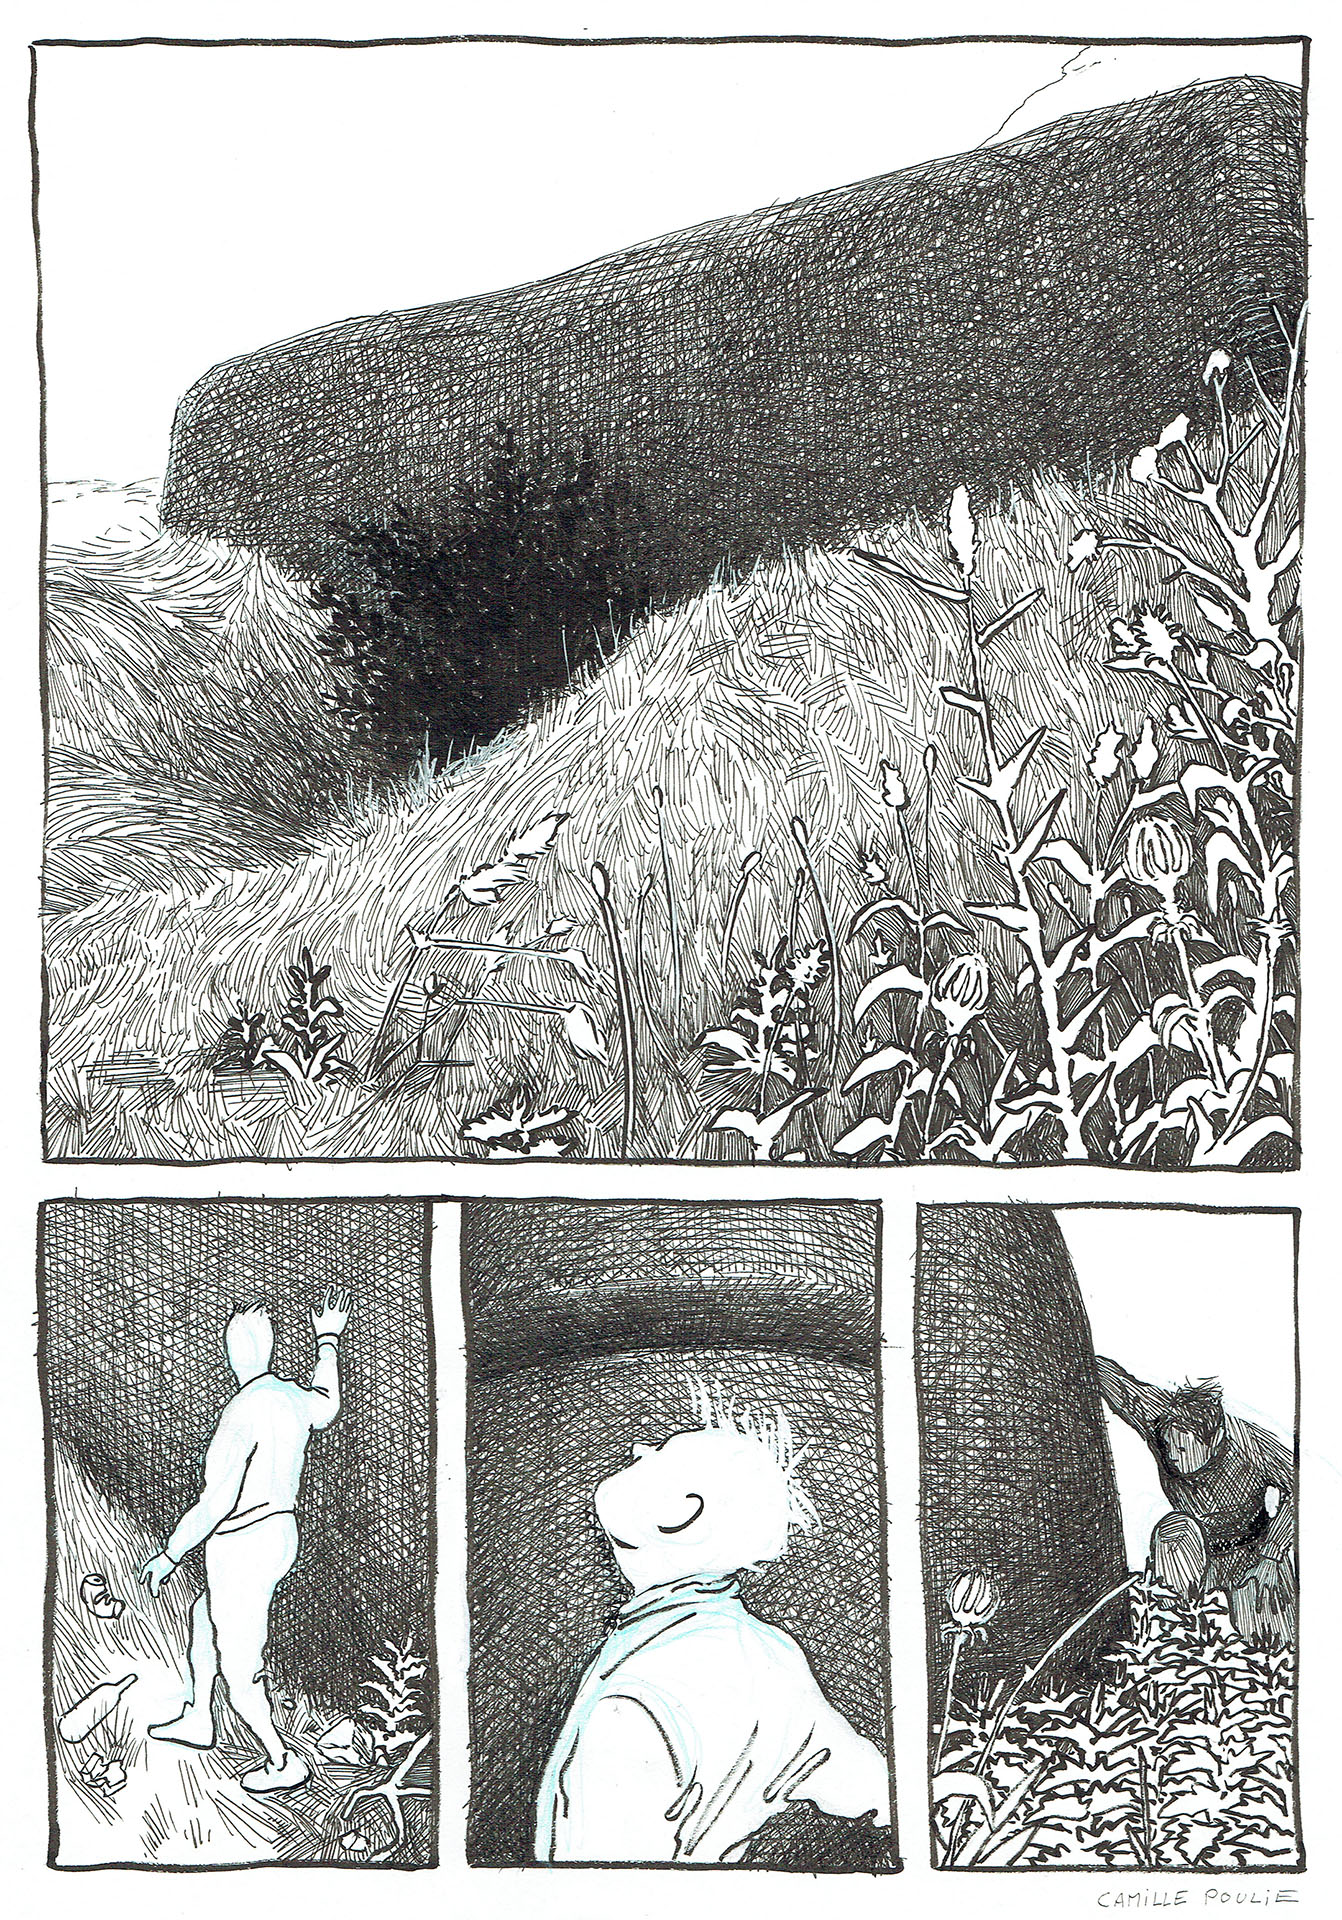 Camille POULIE | Bunker — Page 9